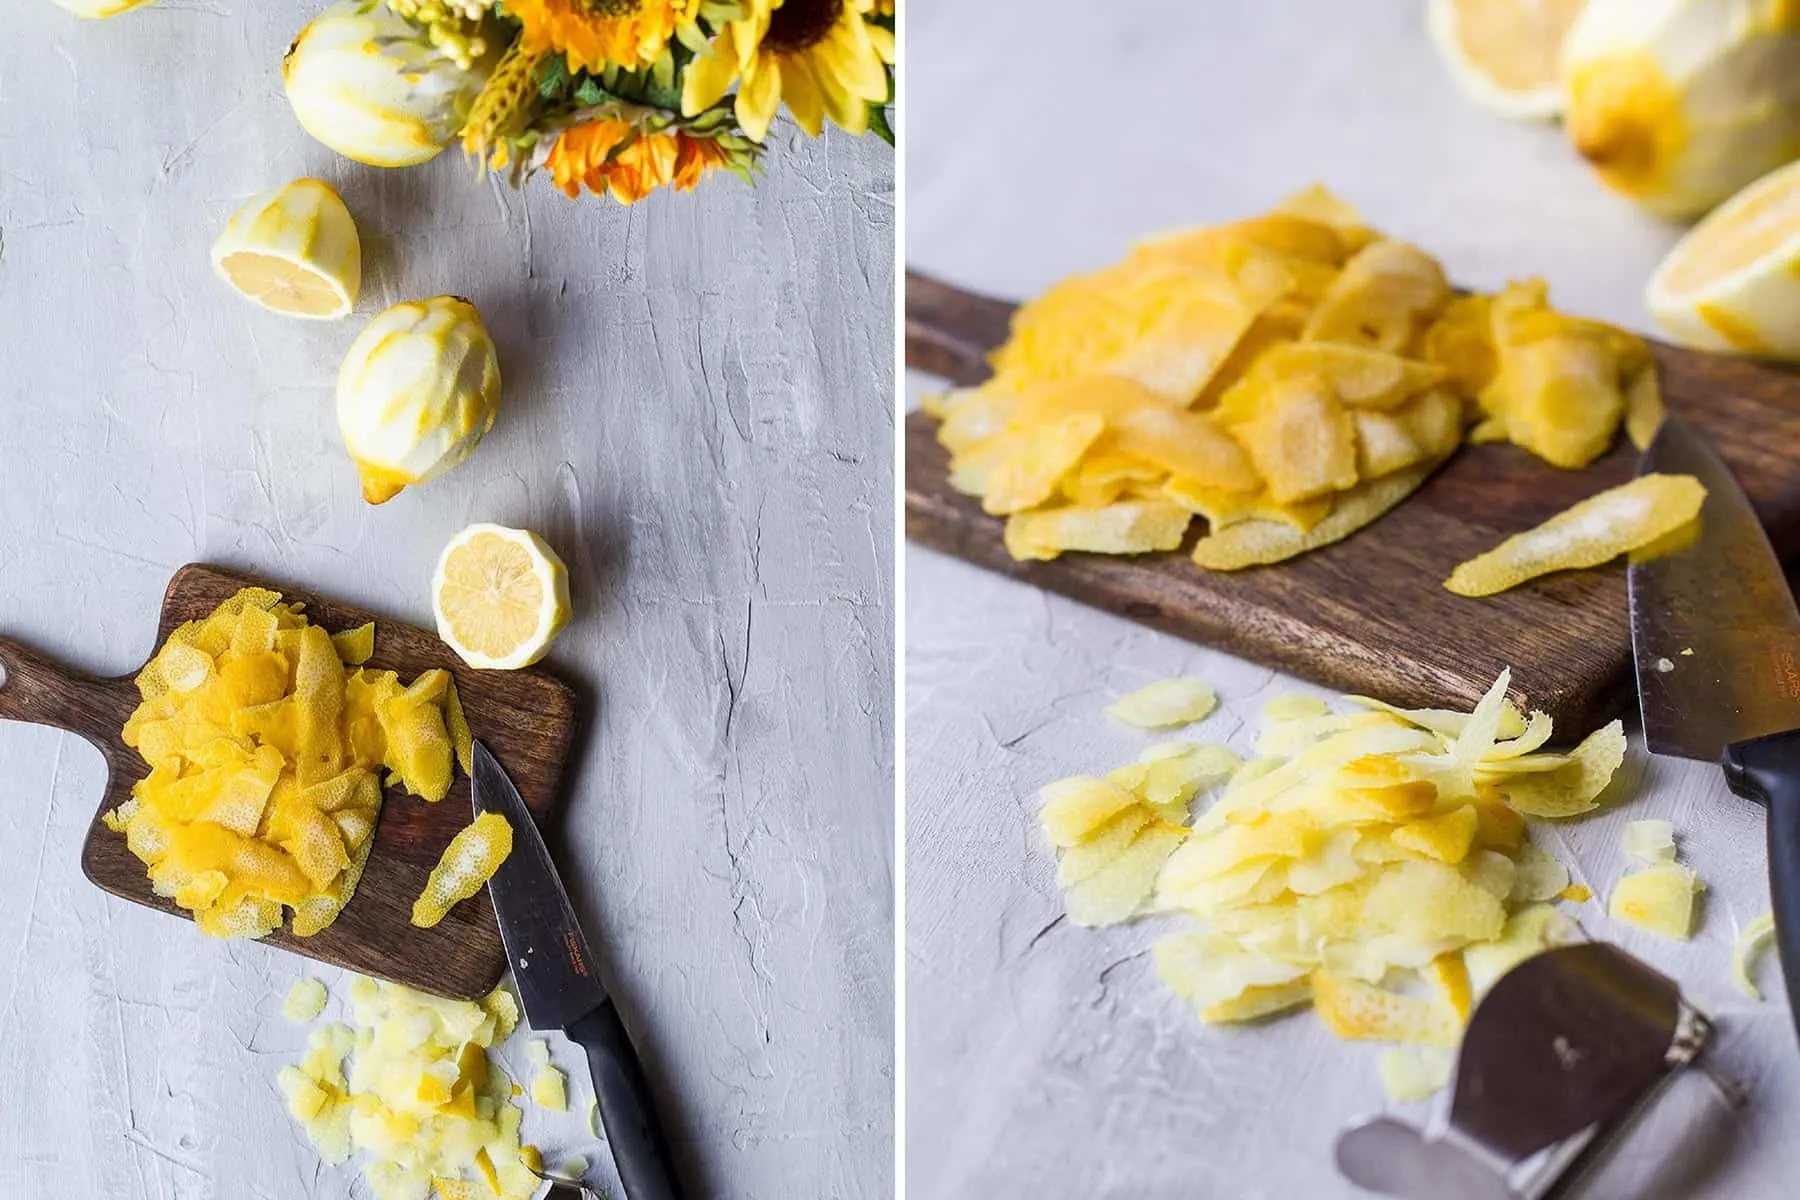 How to get all the white pith off the lemon peels.